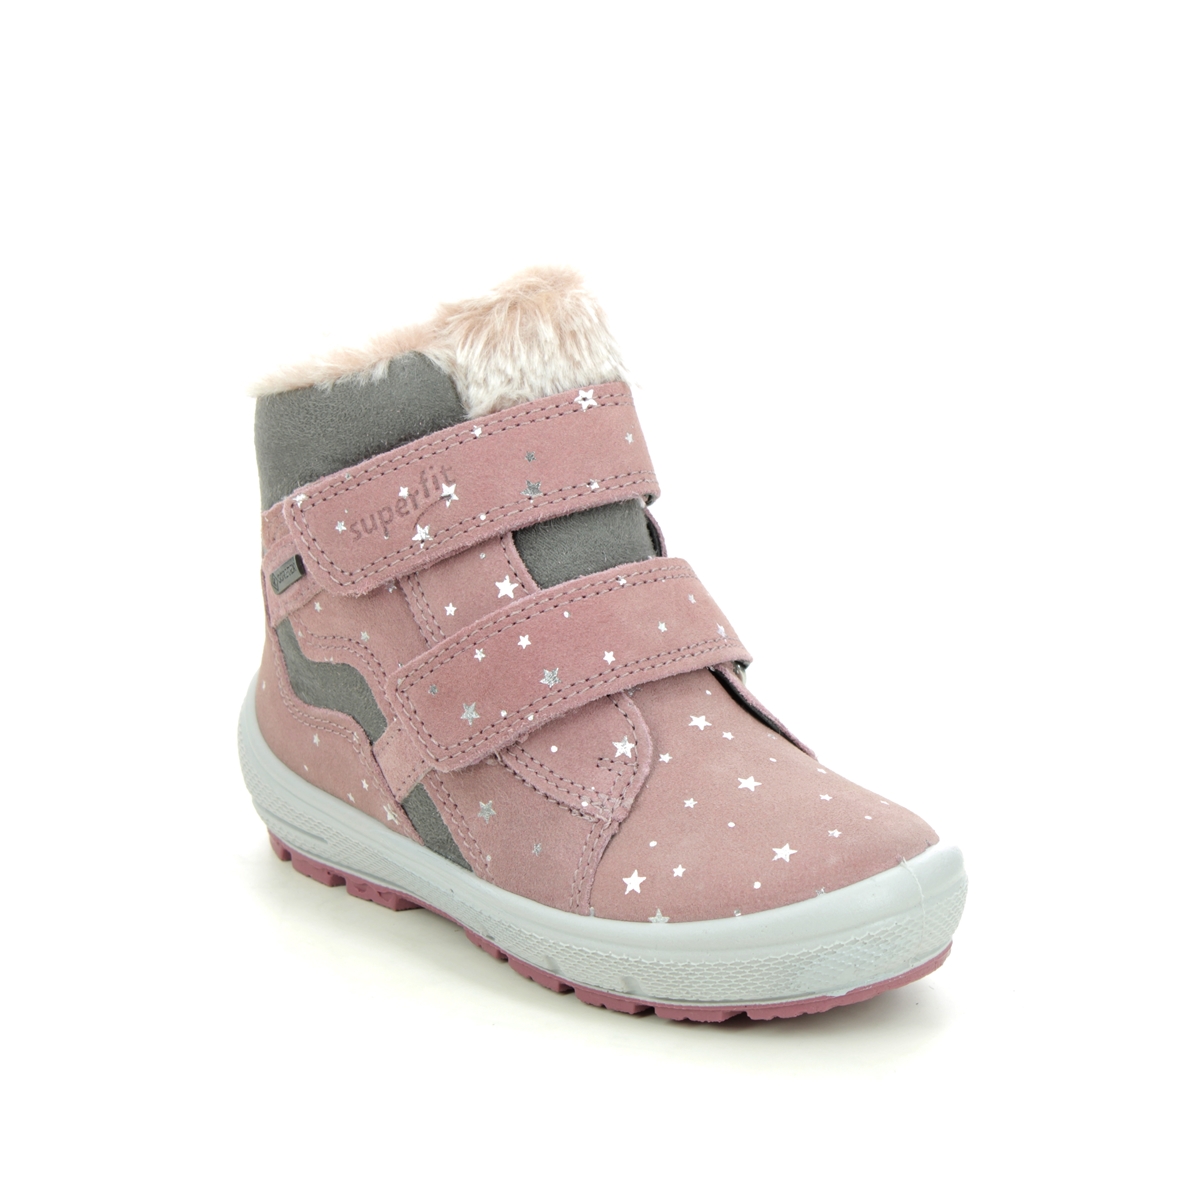 Superfit Groovy Gtx Pink Leather Kids Toddler Girls Boots 1006316-5500 In Size 27 In Plain Pink Leather